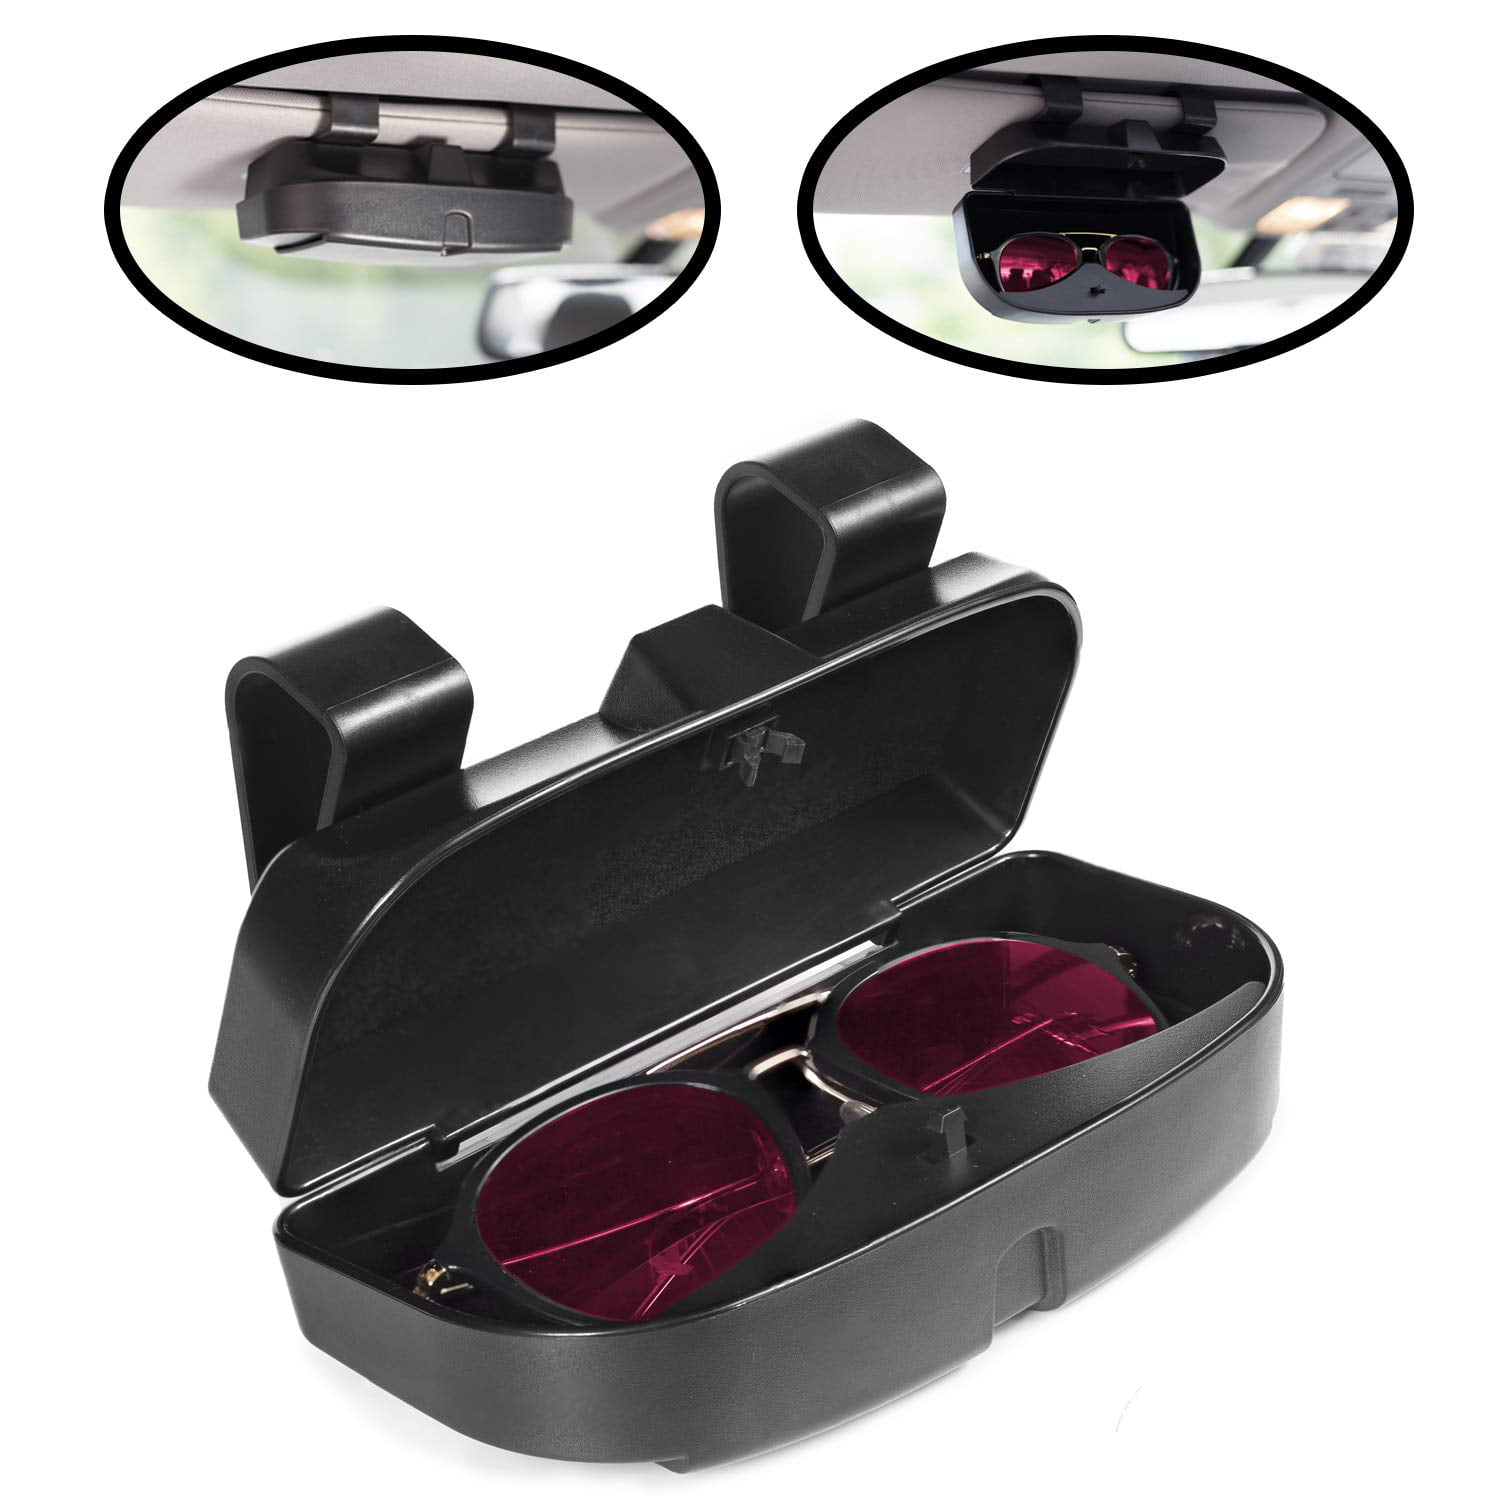 Car Sun Visor Glasses Case Fixing Clip Gray 2 Credit Card Slots Multi-Function Eye Sunglasses Storage Box with Ticket Holder Suitable for All Models of Cars 